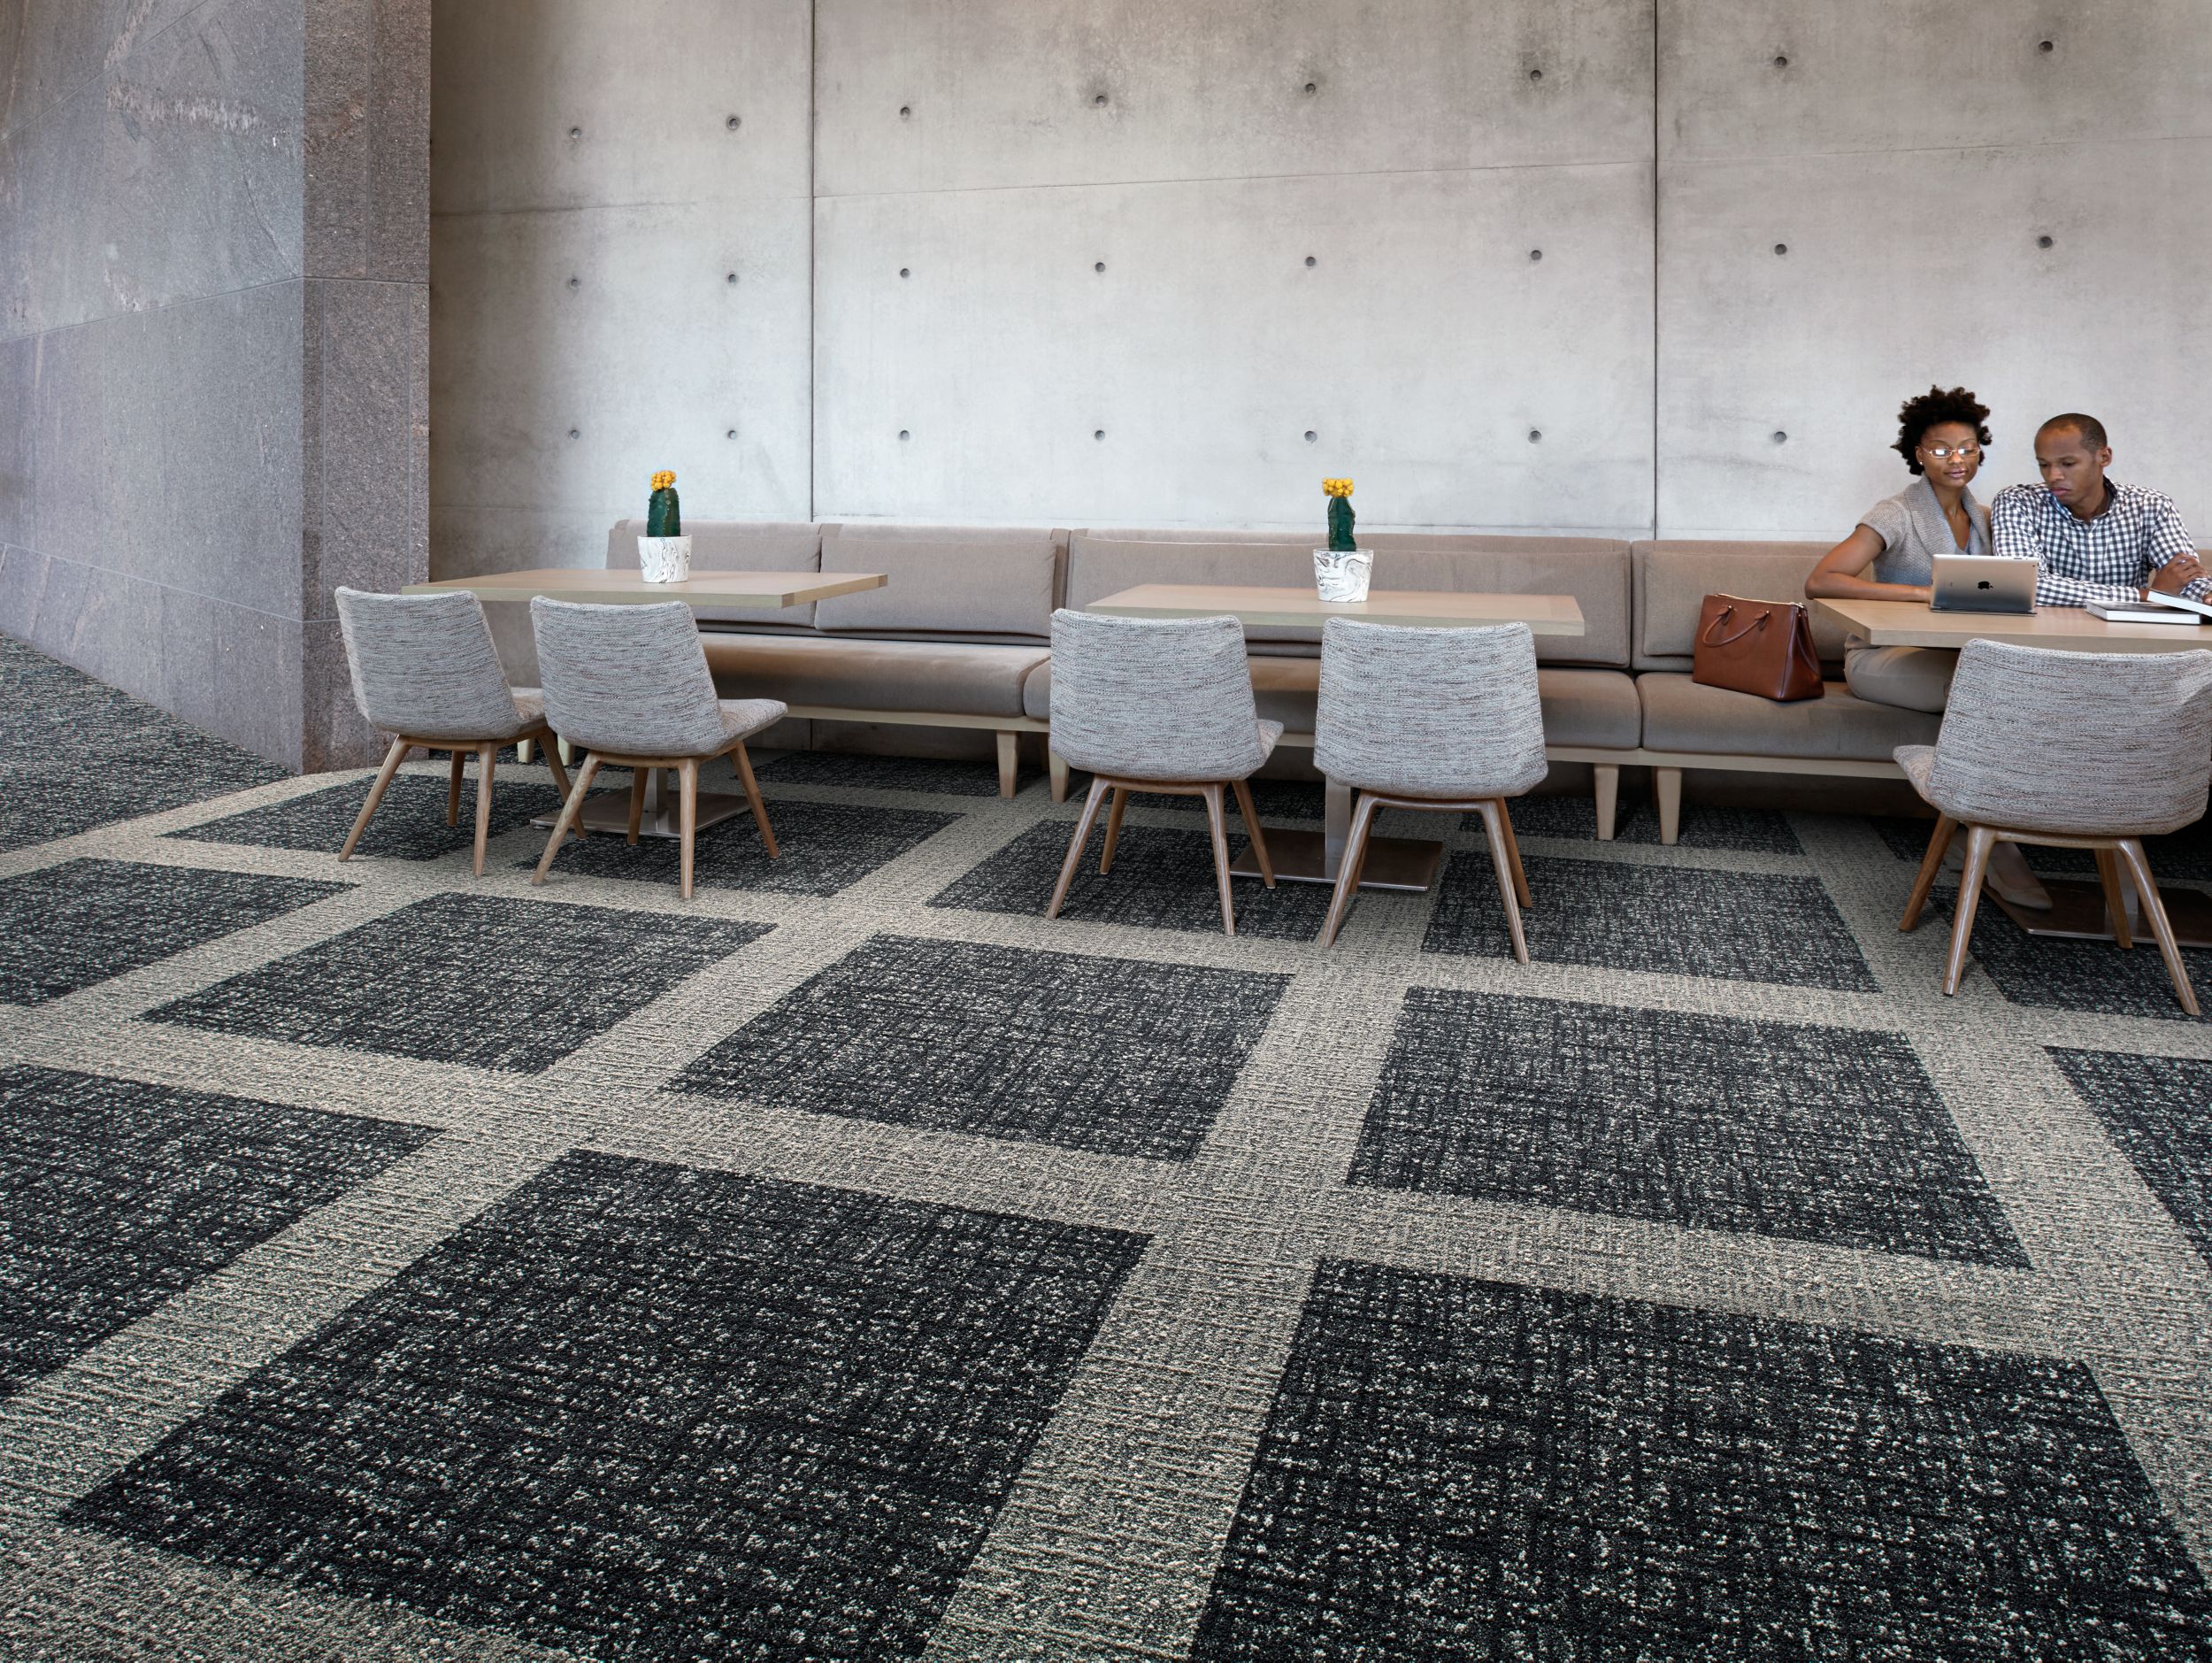 Interface WW895 plank carpet tile and Textured Woodgrains LVT in office common area with tables and chairs imagen número 2